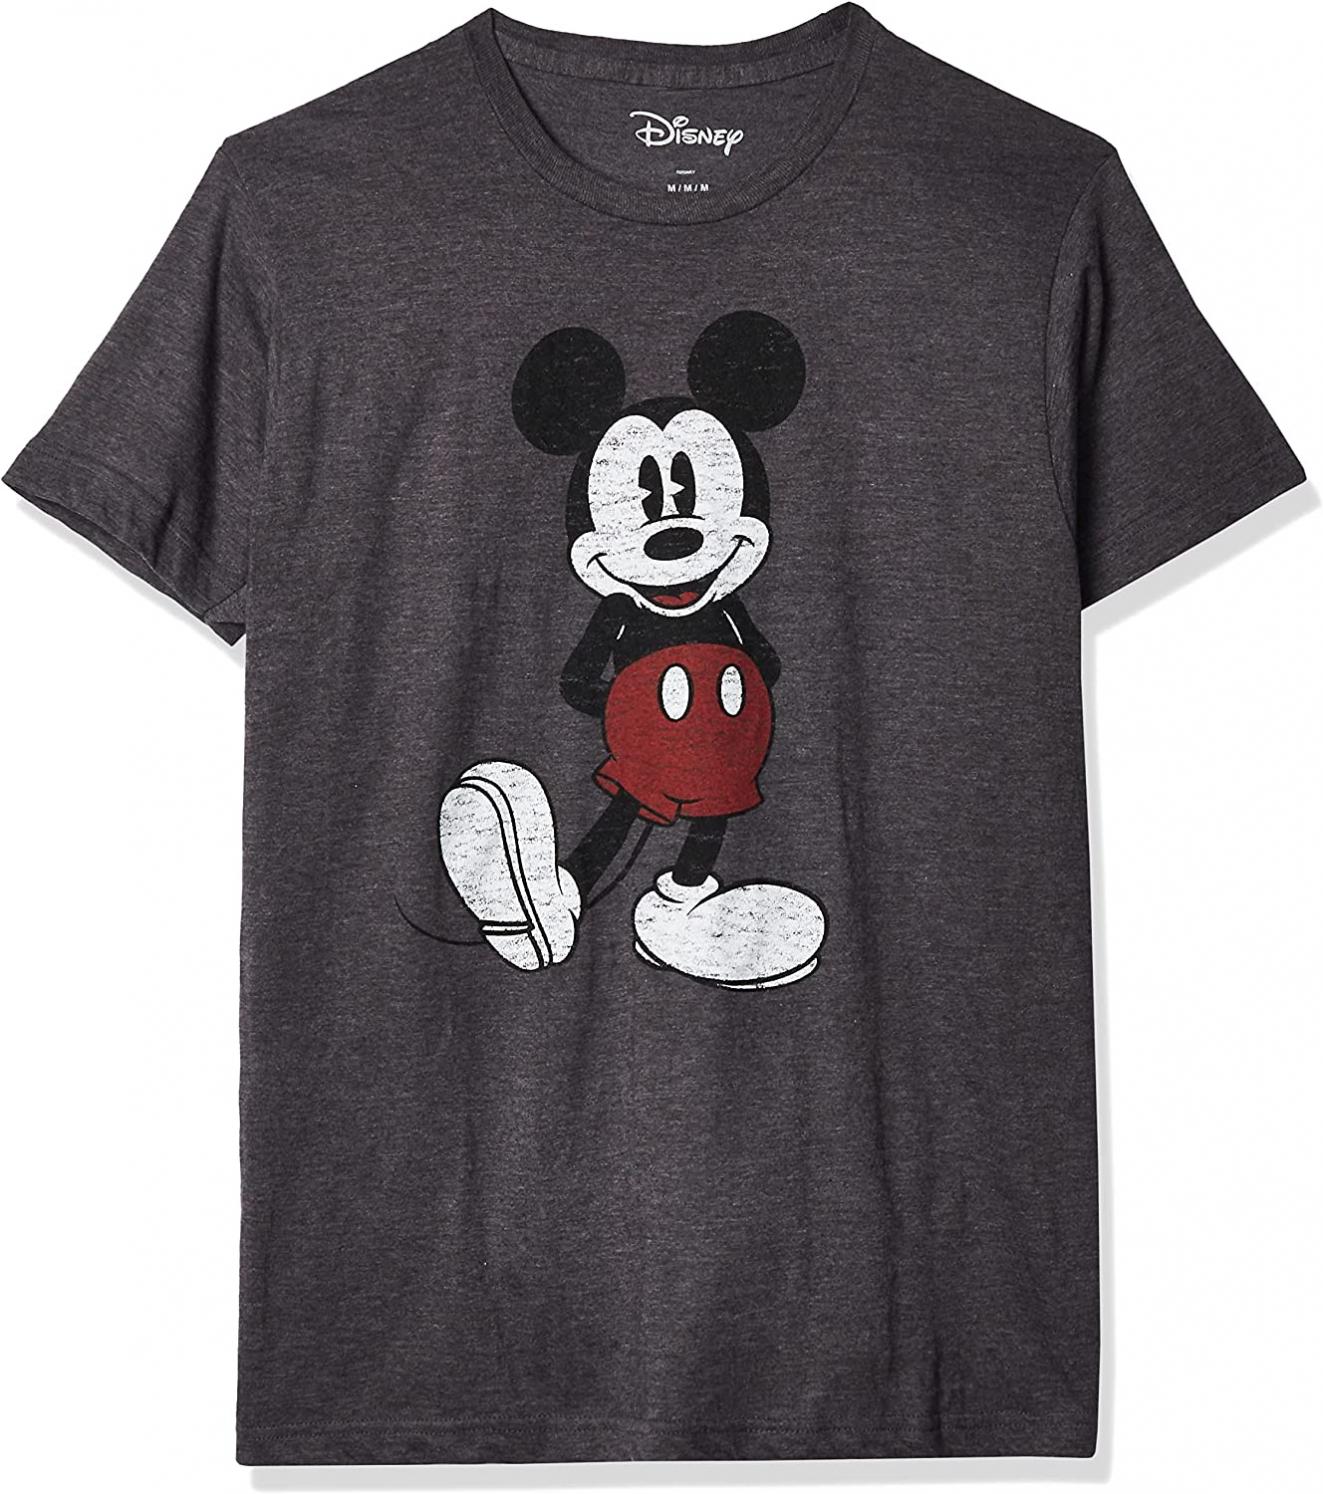 Disney Full Size Mickey Mouse Distressed Look Men's Adult Graphic Tee T-Shirt